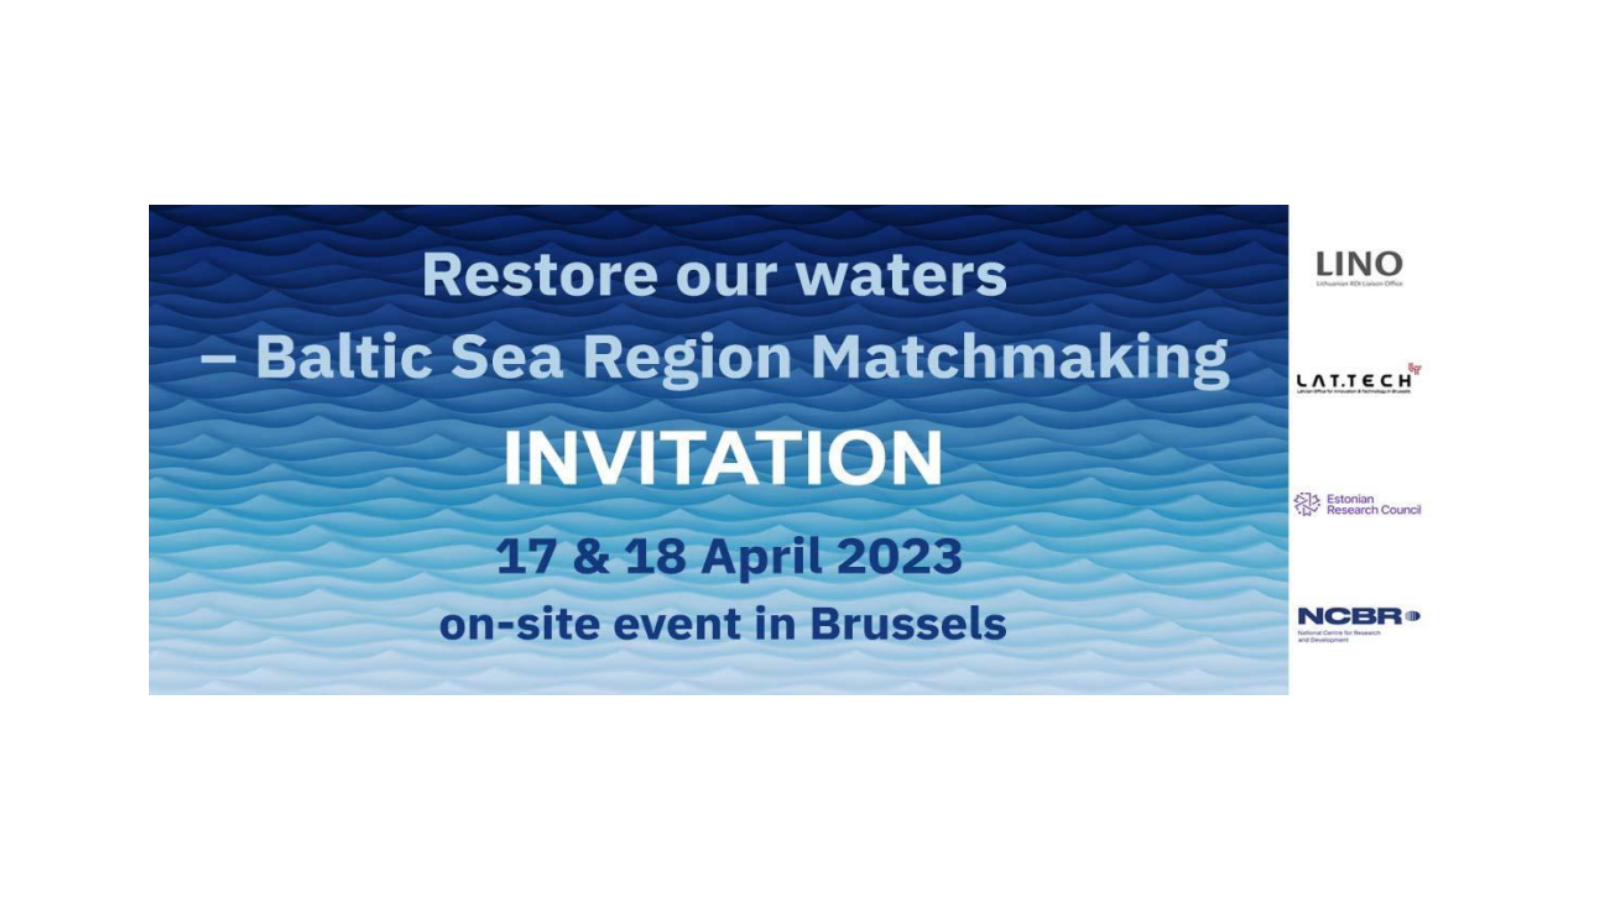 Matchmaking event: Restore our waters – Baltic Sea Region perspective